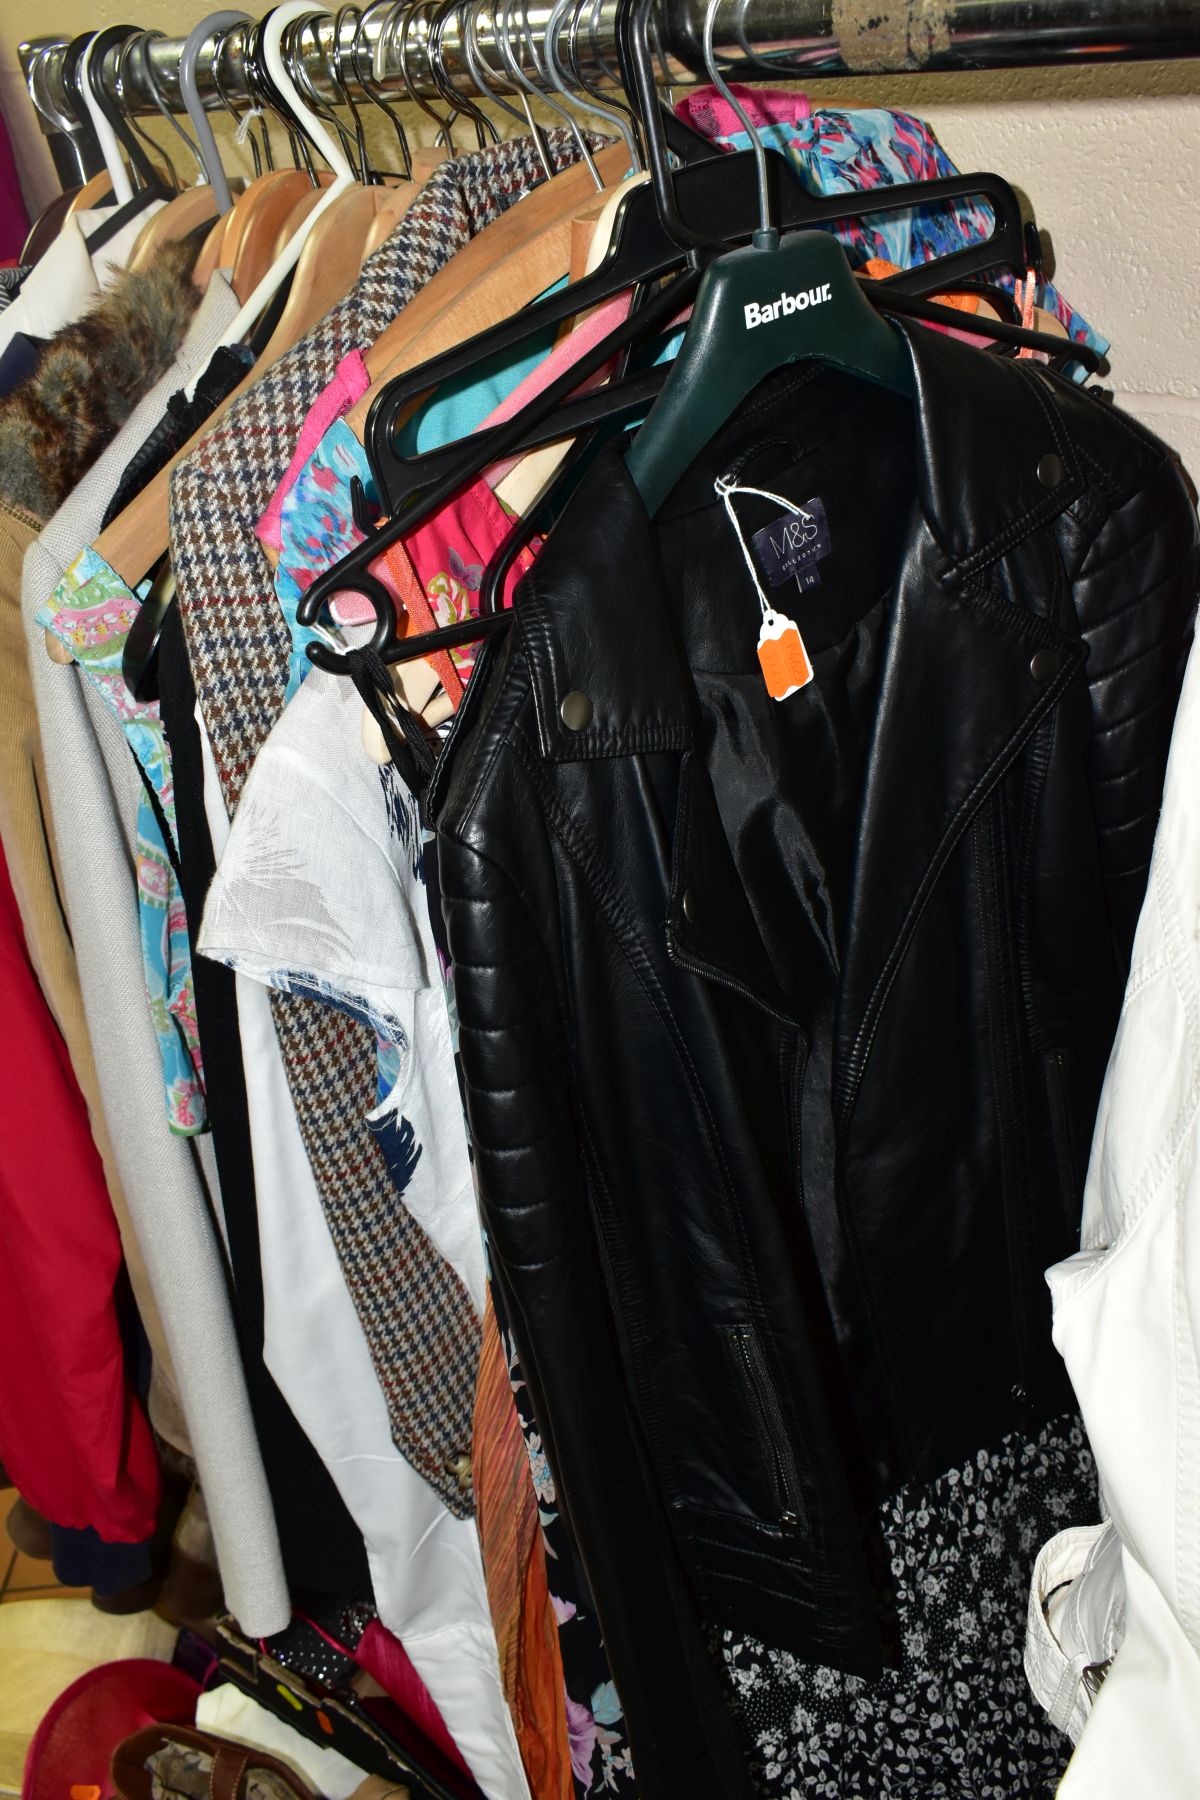 VARIOUS LADIES JACKETS, DRESSES, SKIRTS, HANDBAGS, SHOES, SCARVES, ETC, mostly sizes 12/14 to - Image 4 of 14